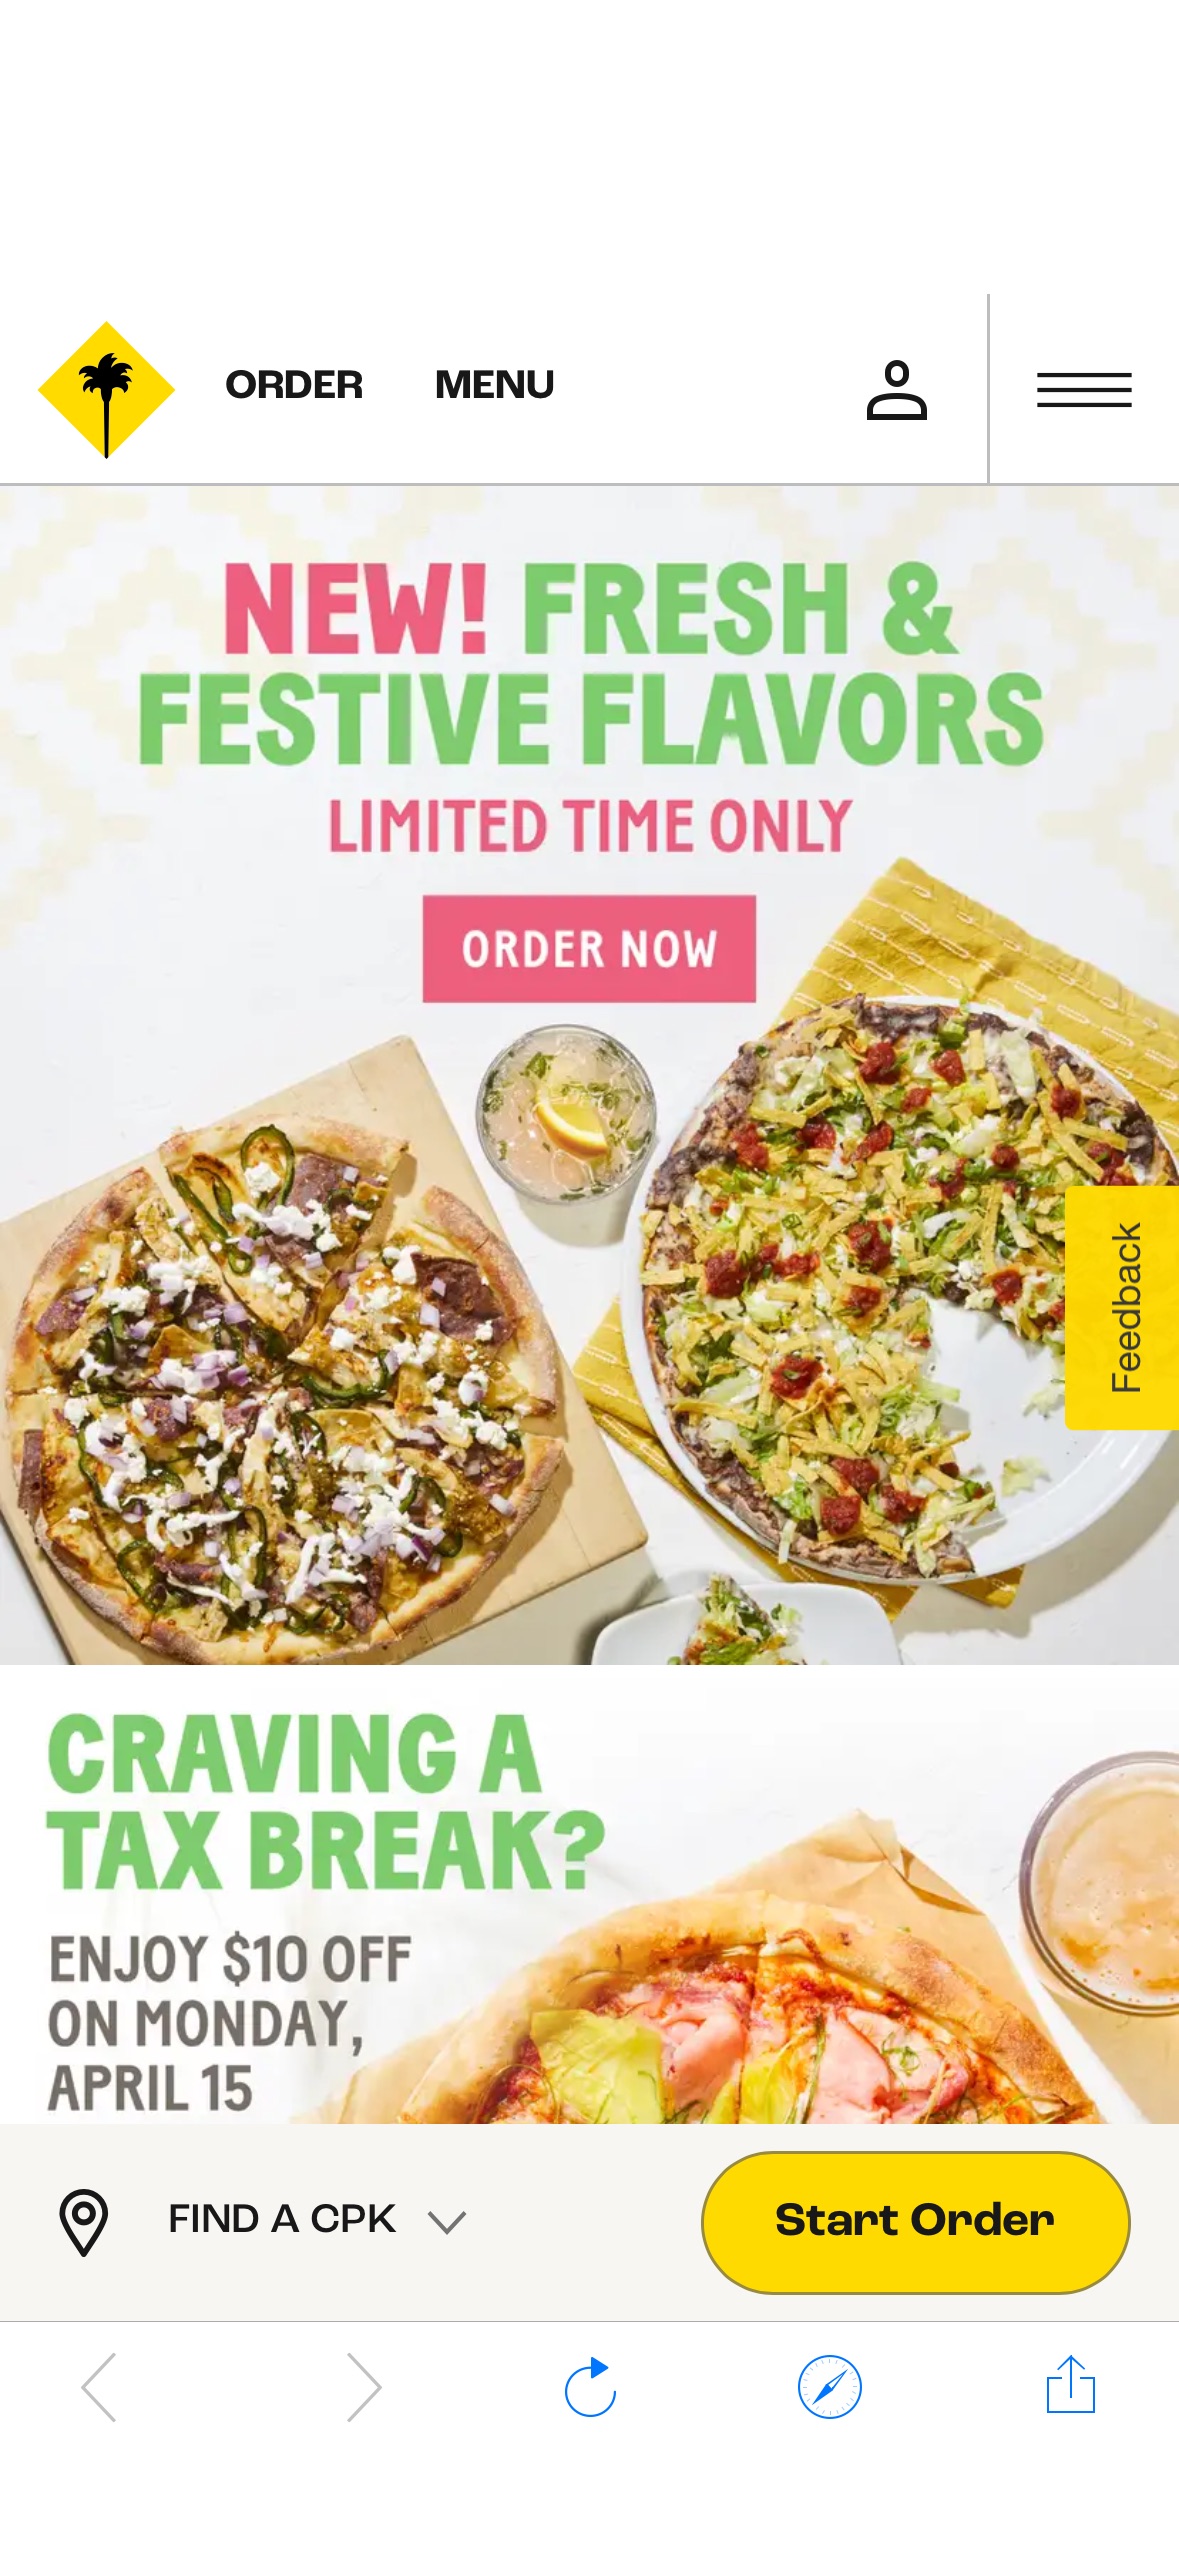 California Pizza Kitchen – California Pizza Kitchen CPK rewards members can save $10 on any $40 order on Tax Day. Offer is valid for dine-in or take-out orders. If you’re not already a rewards member 